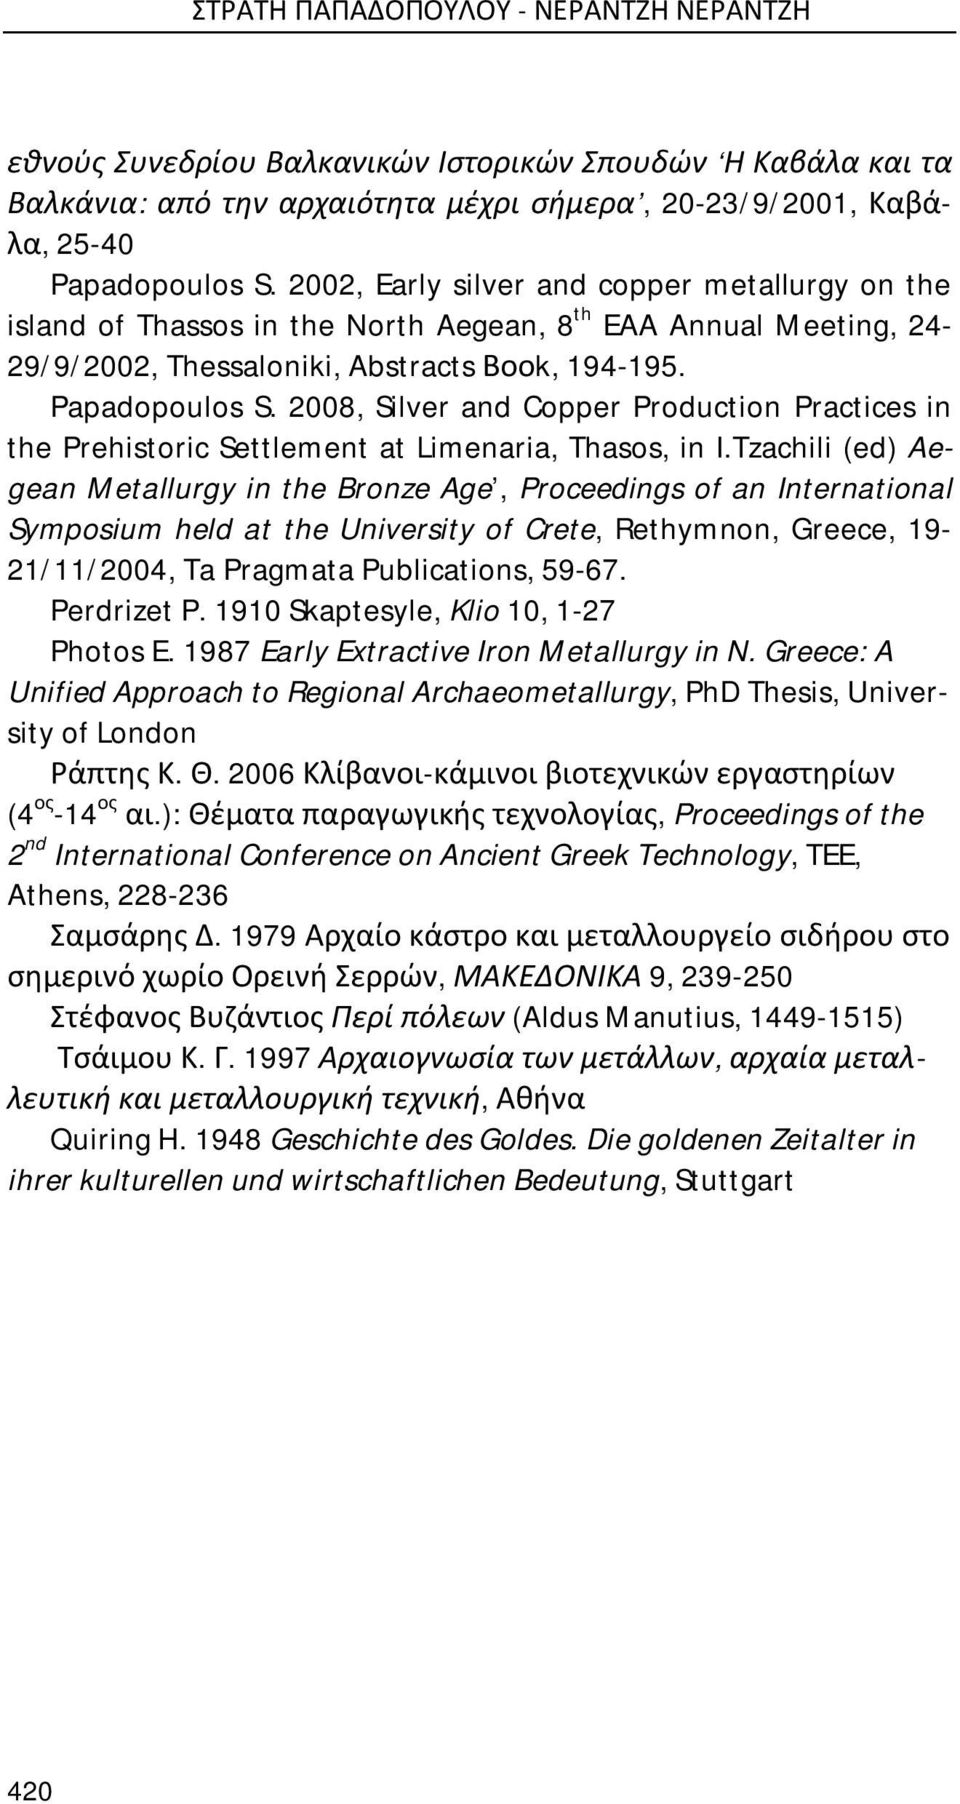 2008, Silver and Copper Production Practices in the Prehistoric Settlement at Limenaria, Thasos, in I.